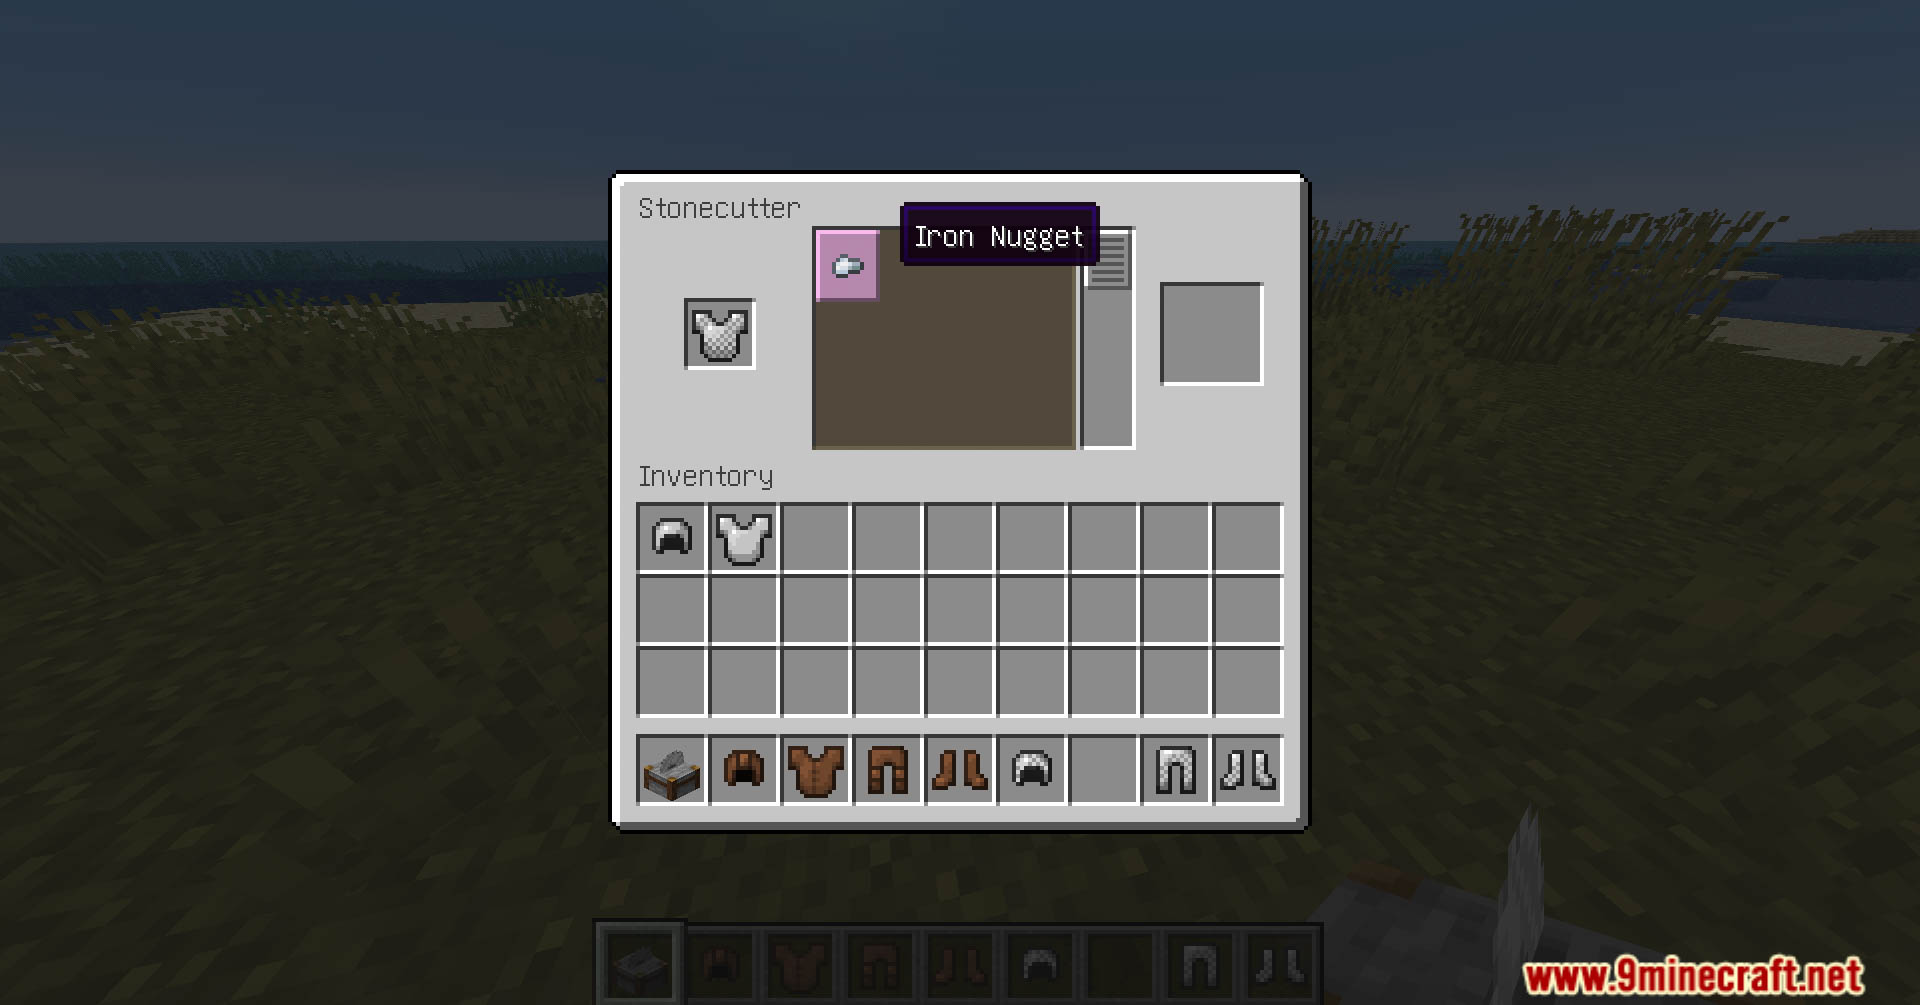 Decompose Data Pack (1.20.4, 1.19.4) - A Sustainable Crafting Experience! 3